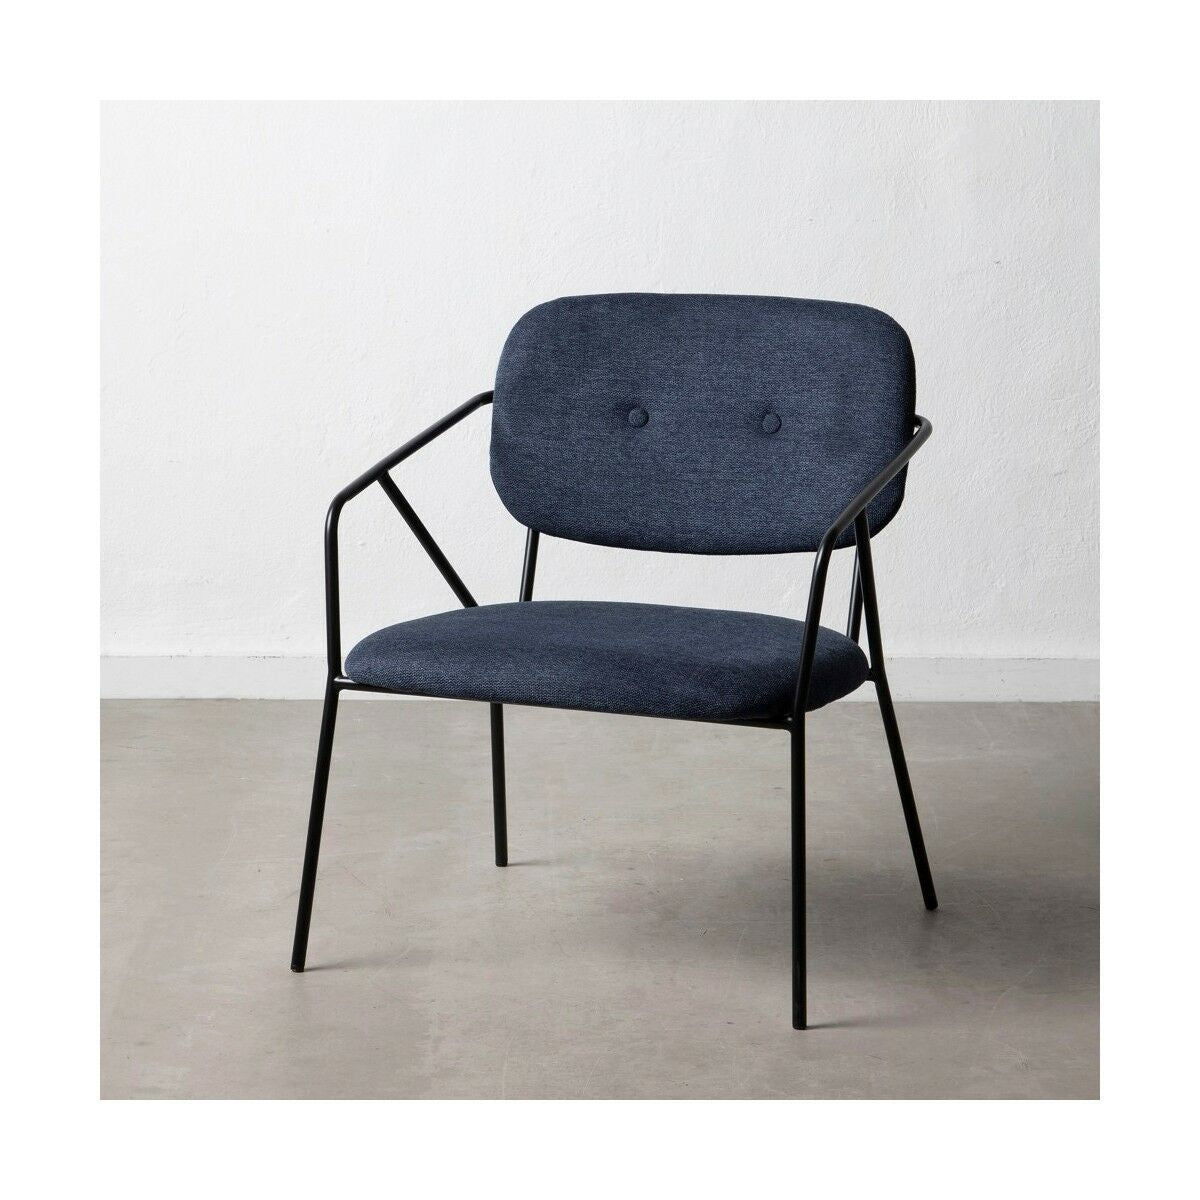 Blue Chair with Armrests with Black Metal Legs (60,5 x 56 x 75 cm)